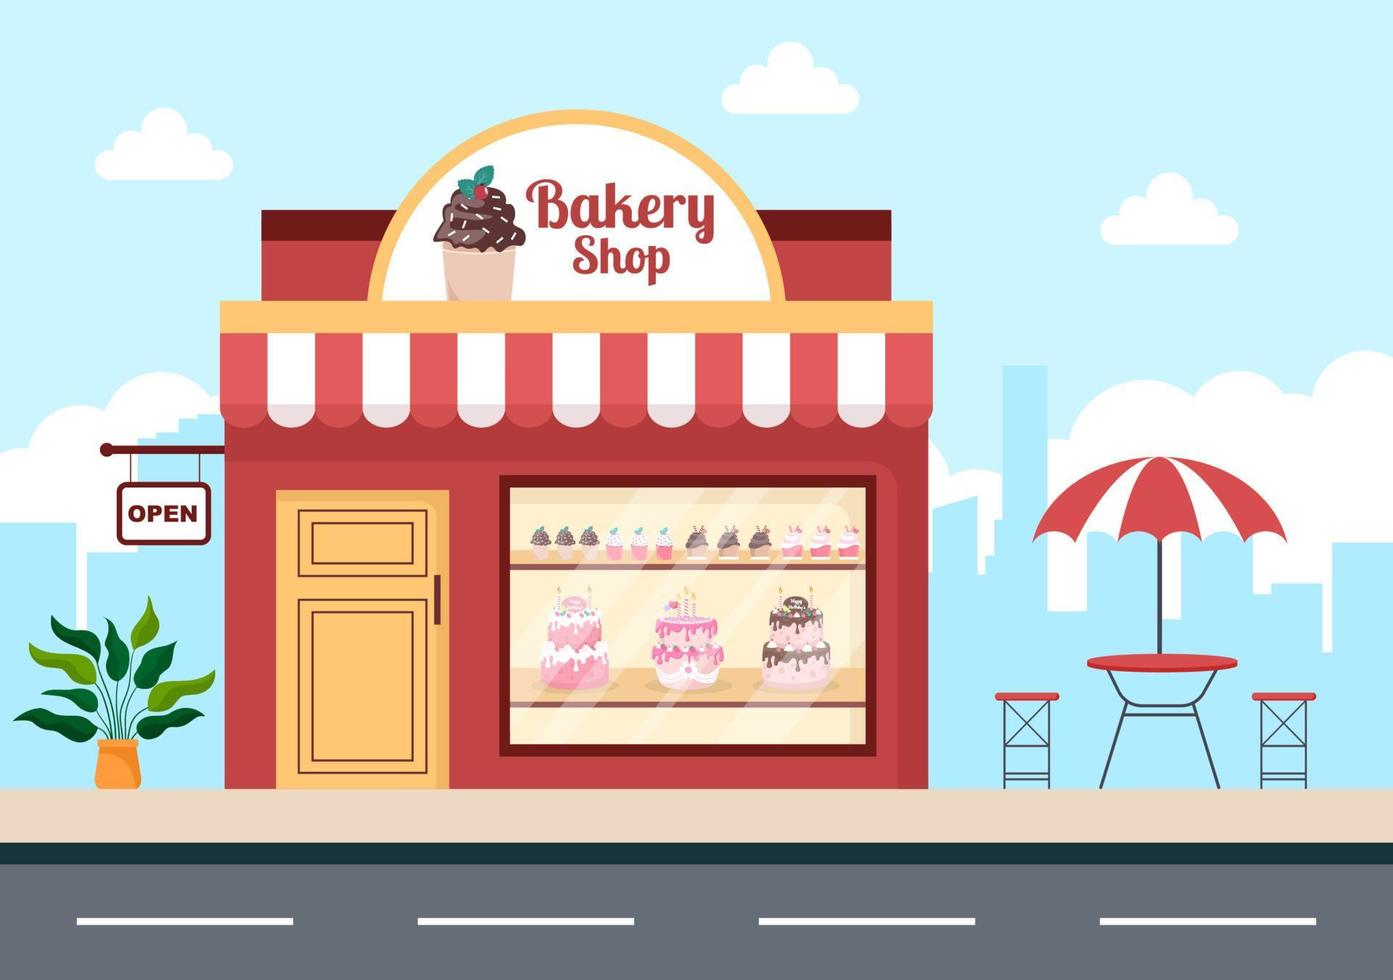 Bakery Shop That Sells Various Types of Bread such as White Bread, Pastry and Others All Baked in Flat Background for Poster Illustration vector